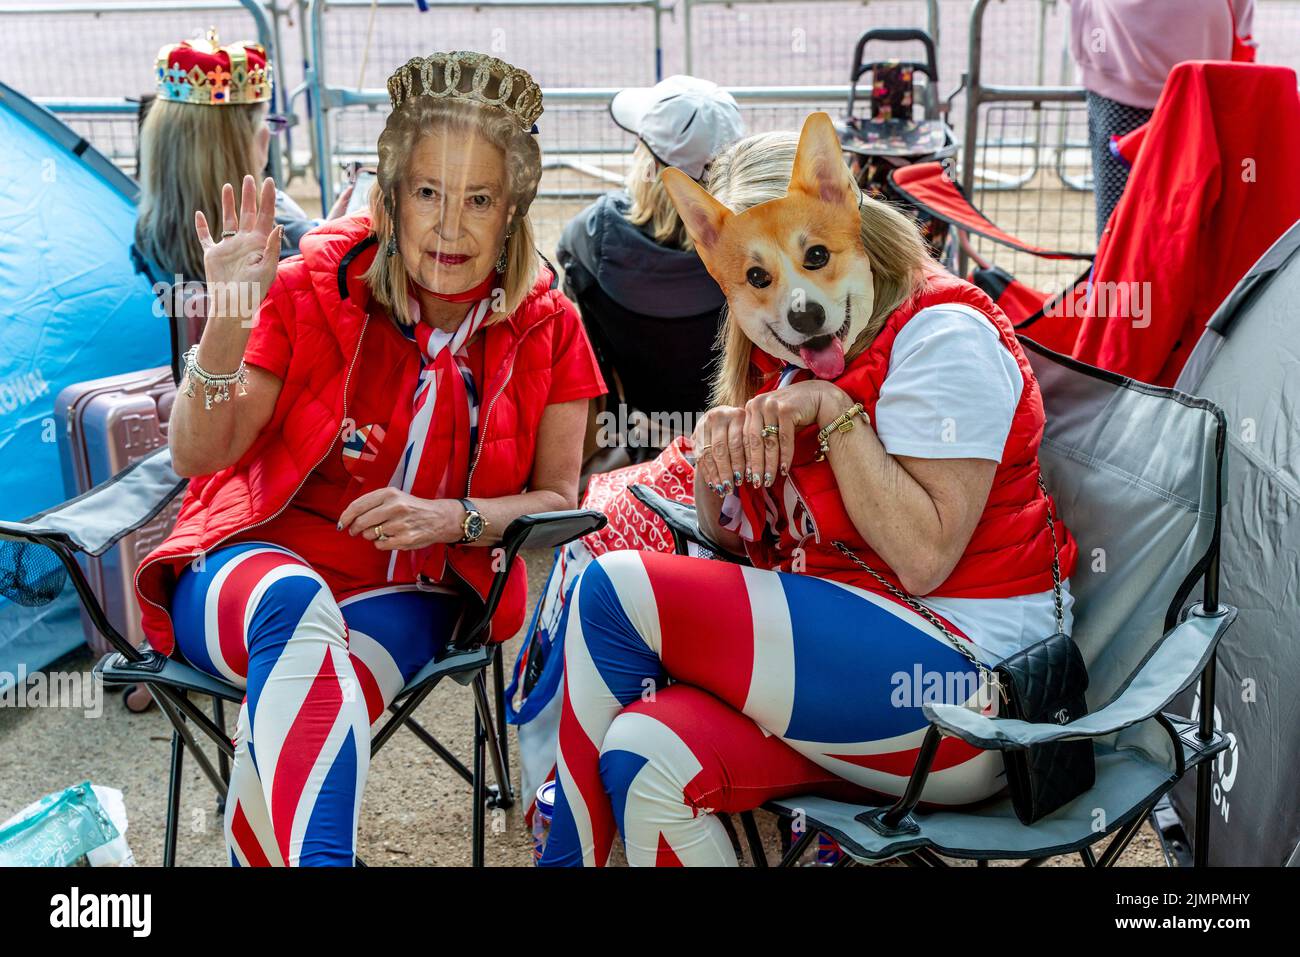 People In Fancy Dress Camp Out Overnight In The Mall For A Good Vantage Spot Before The Queen's Birthday Parade, London, UK. Stock Photo